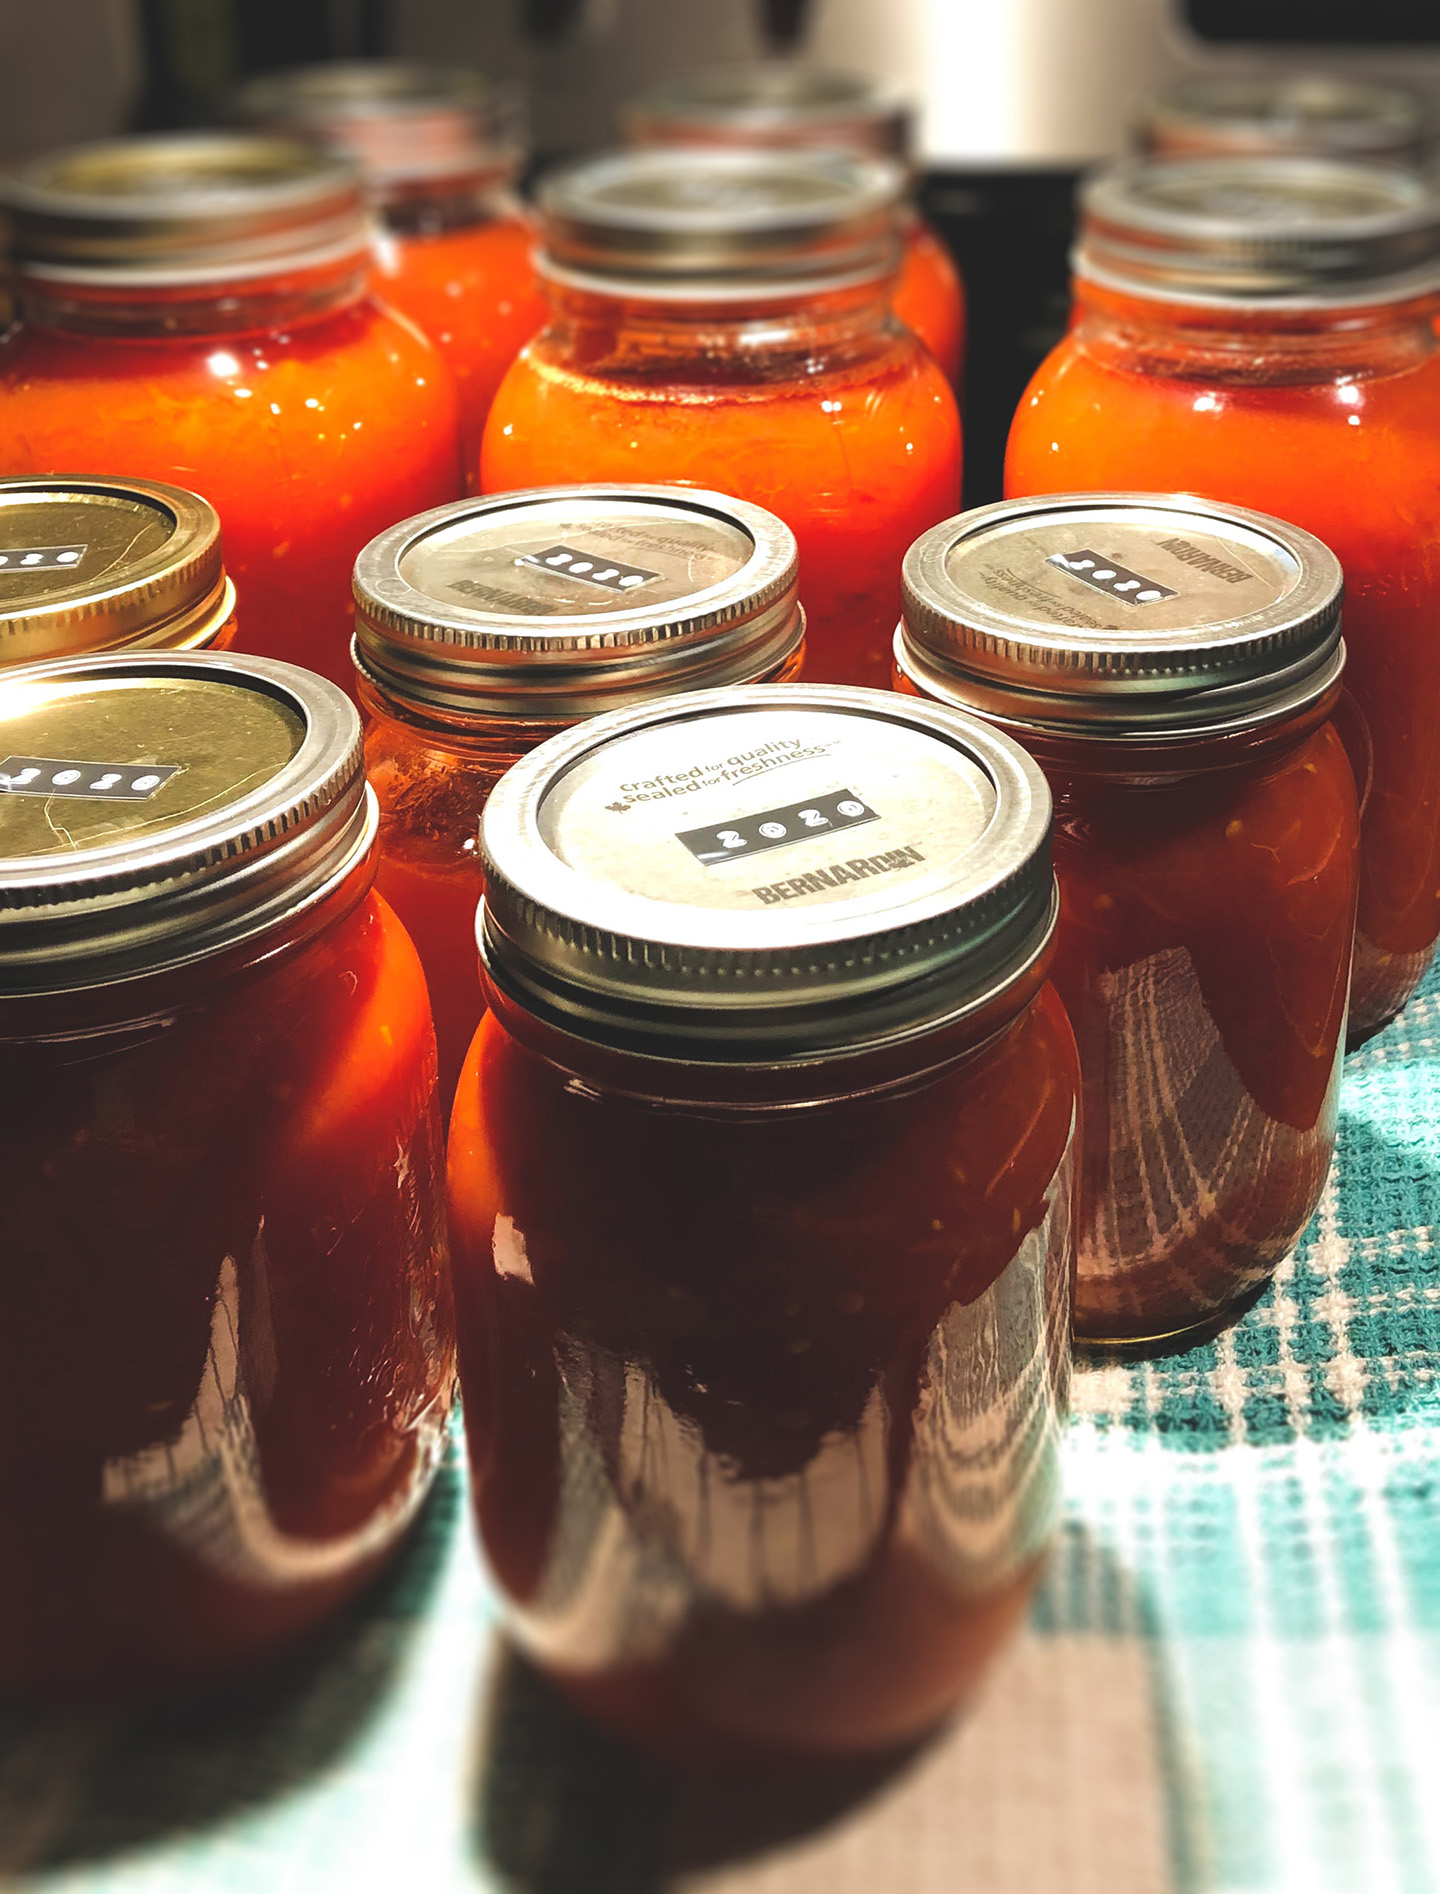 Photo of canned jars with red sauce on them.